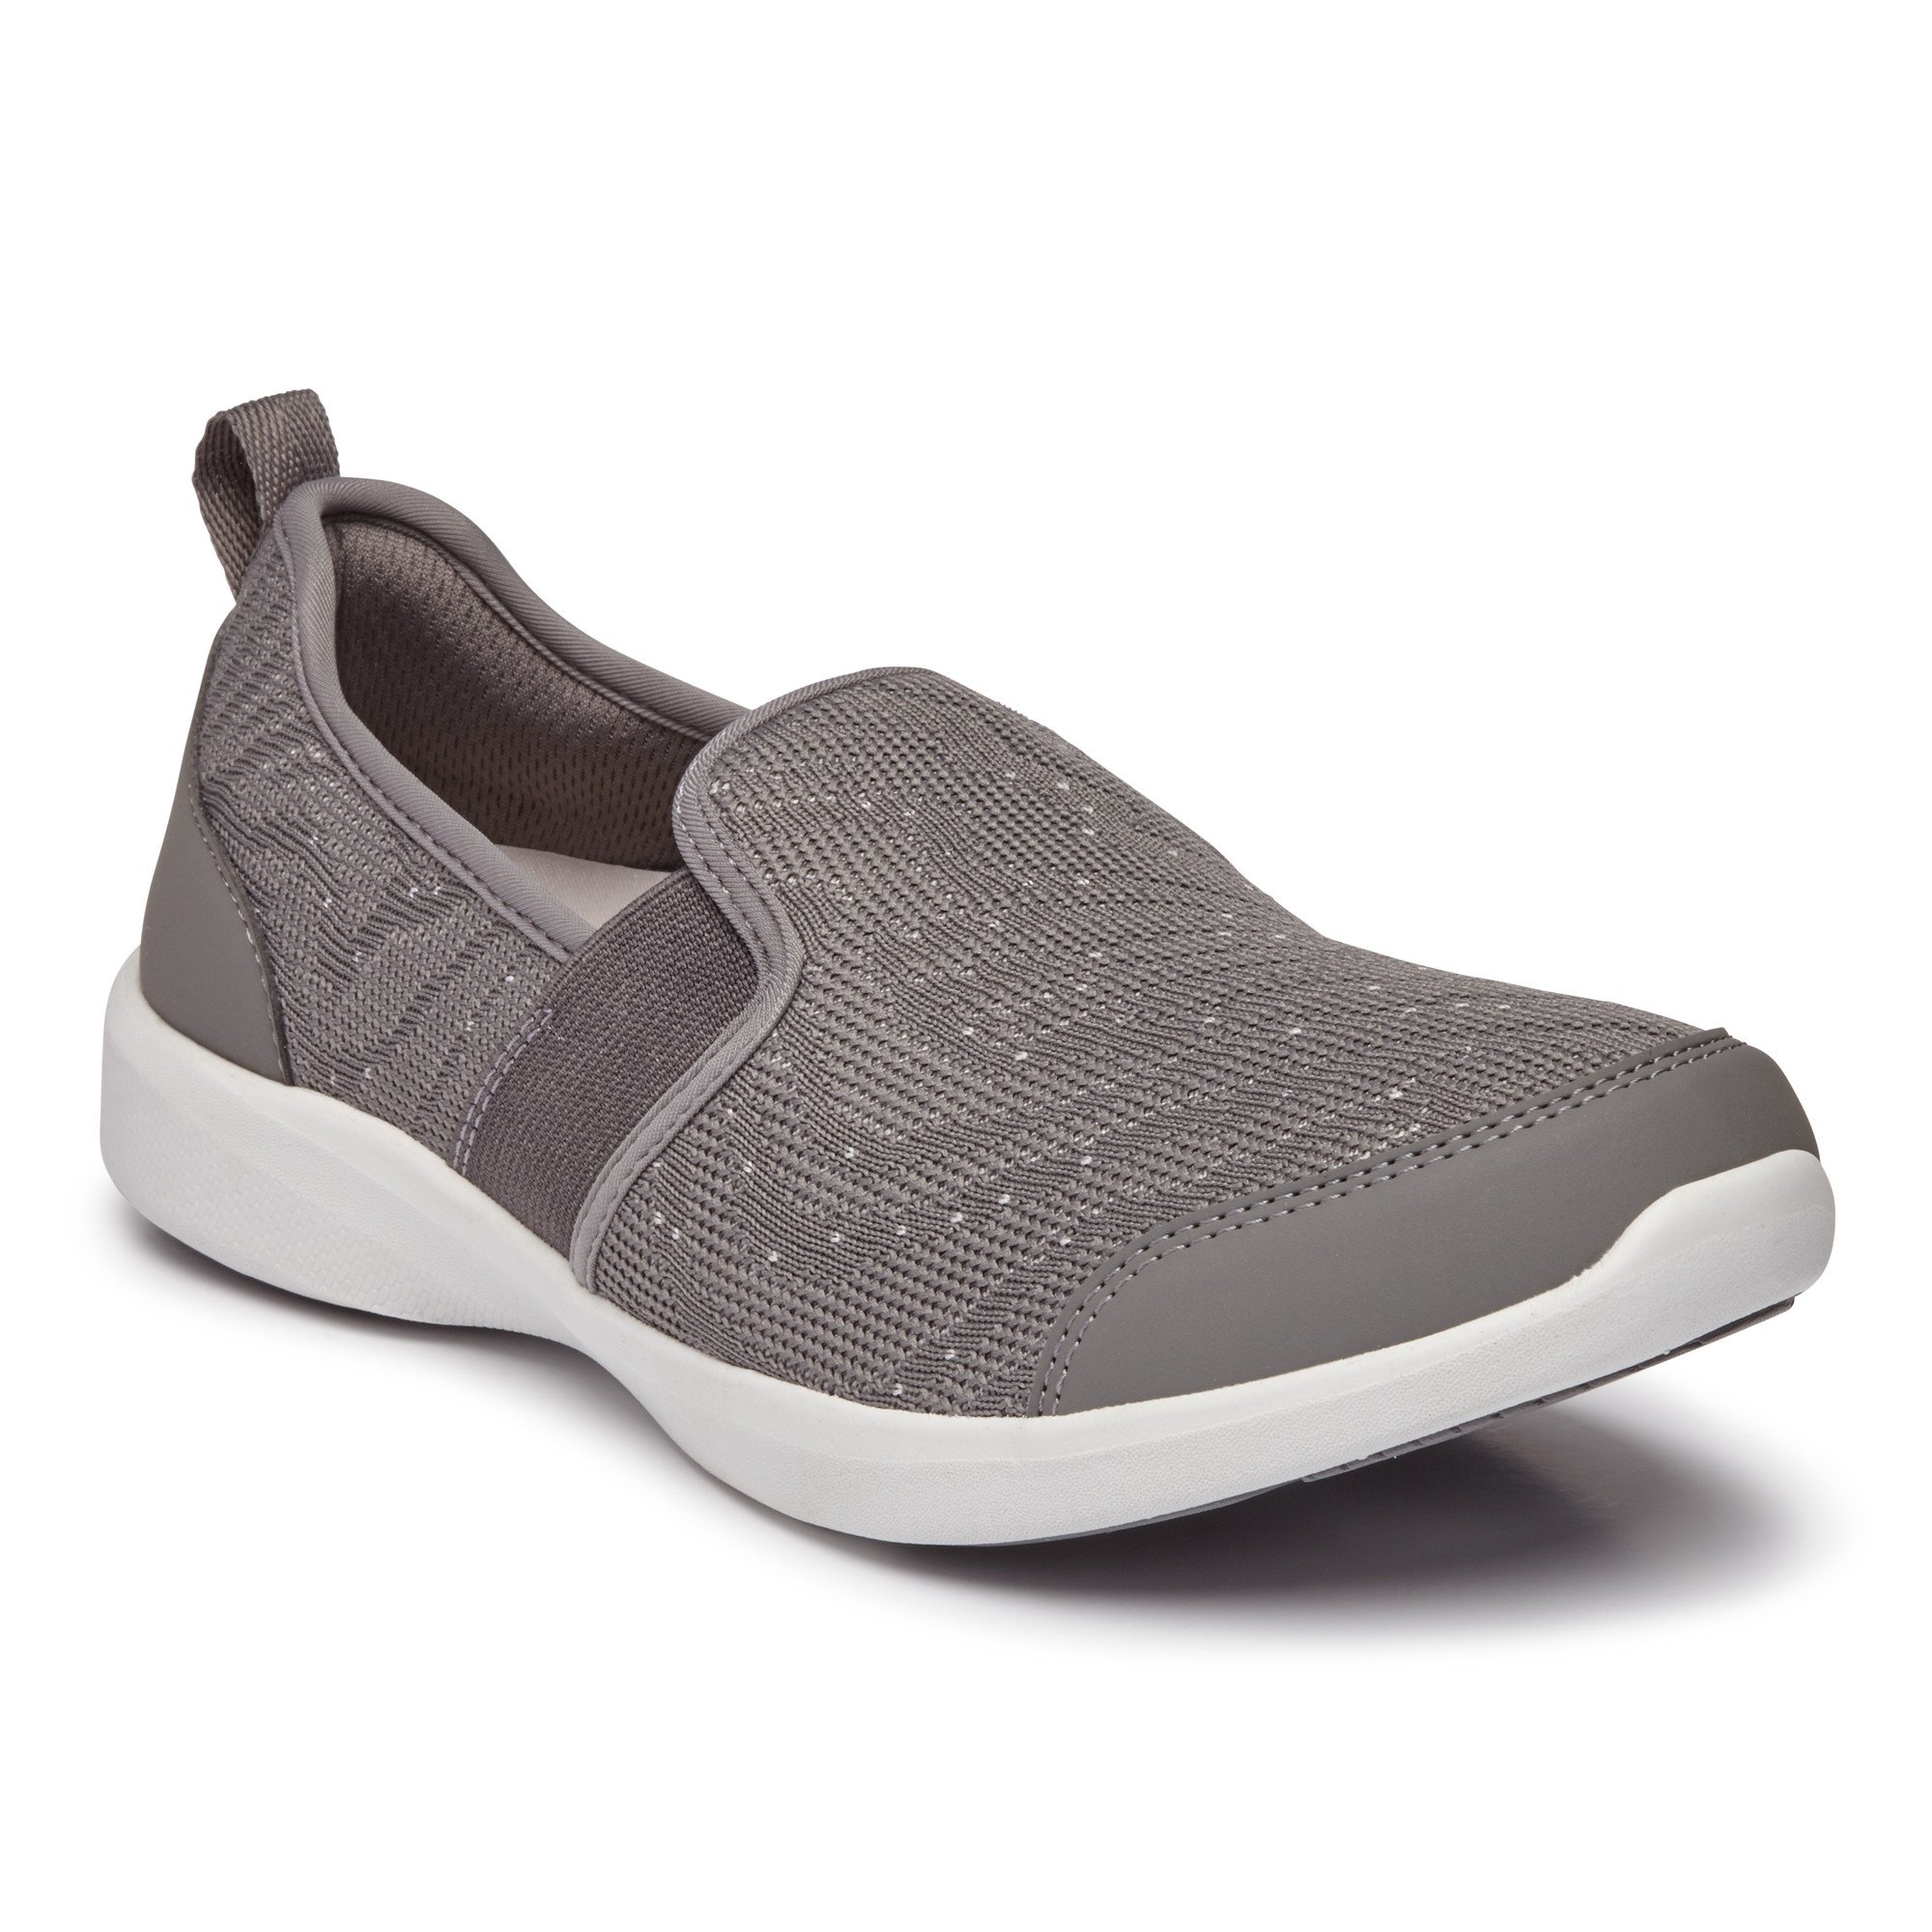 Vionic Womens Sky Roza Slip-on Sneakers Ladies Walking Shoes with Concealed Orthotic Arch Support